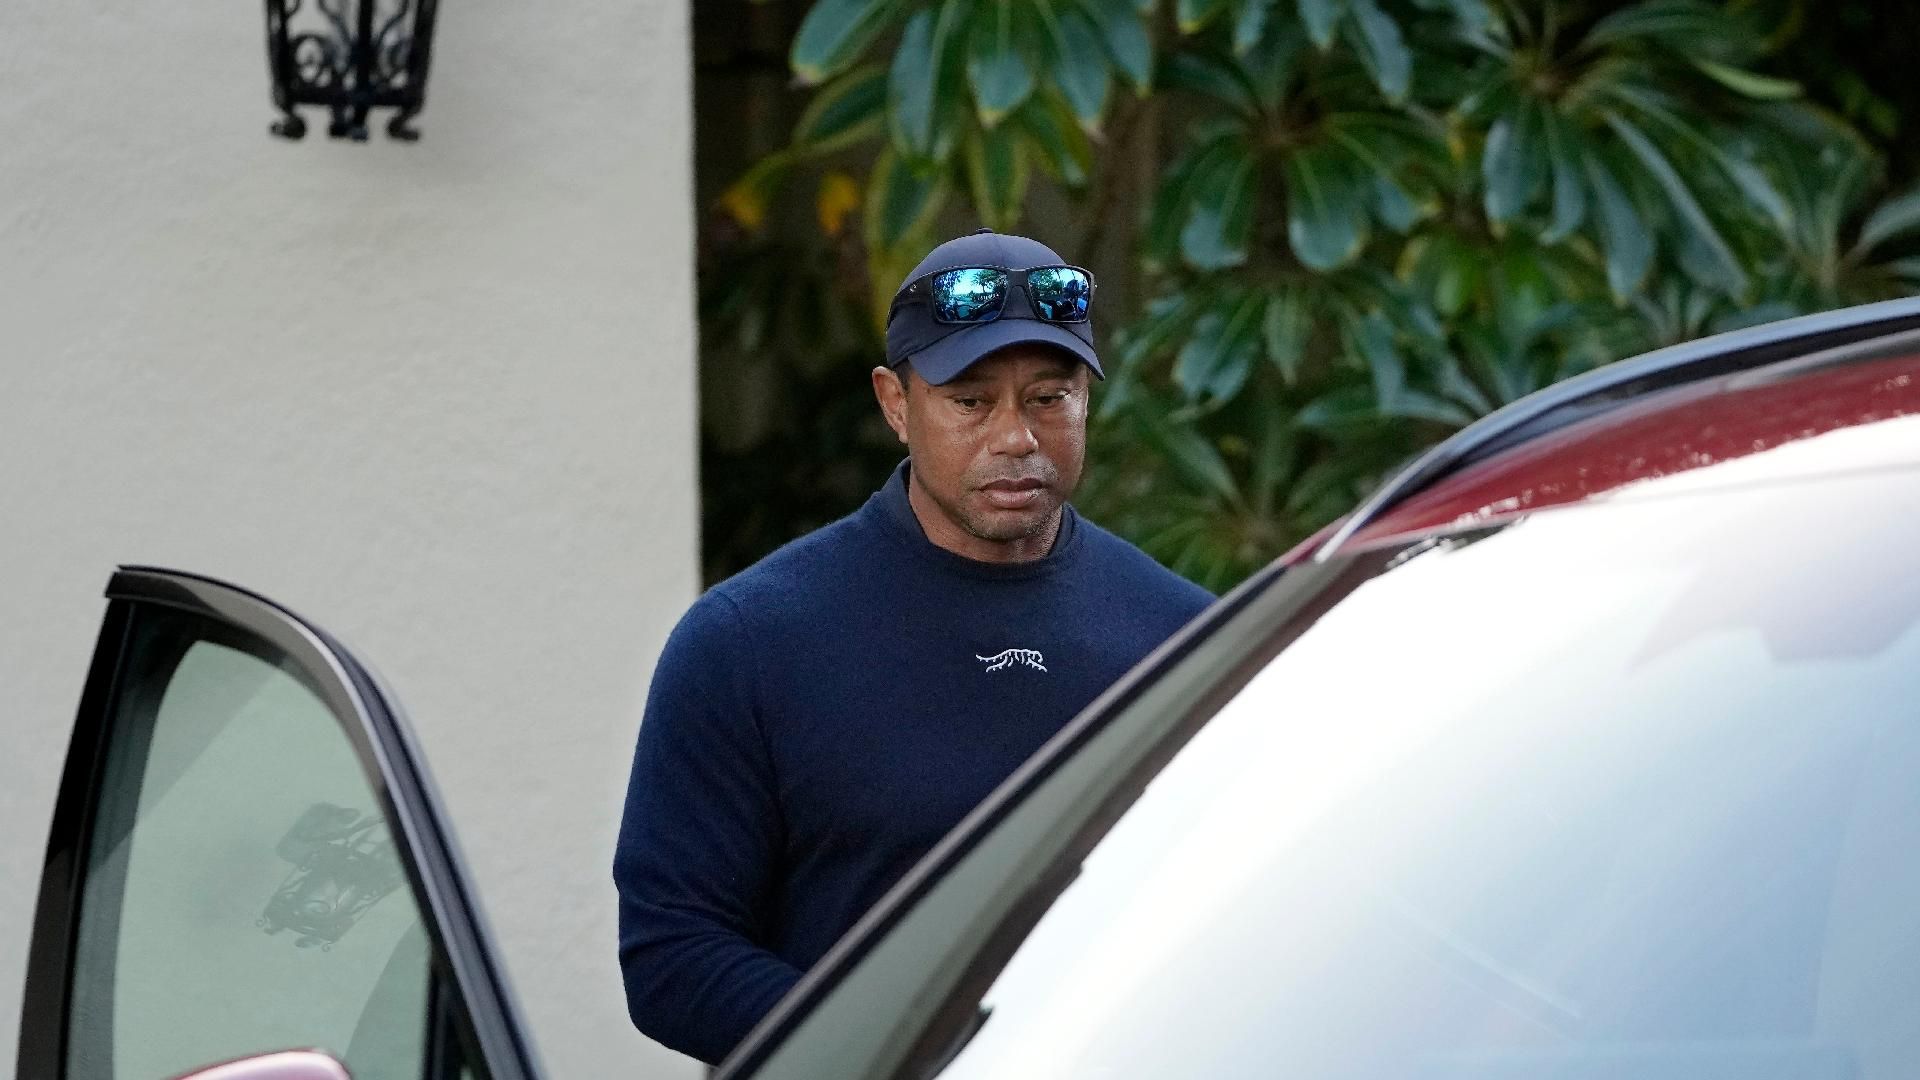 Tiger Woods is feeling "much better" after pulling out of the Genesis tournament due to flu-like symptoms